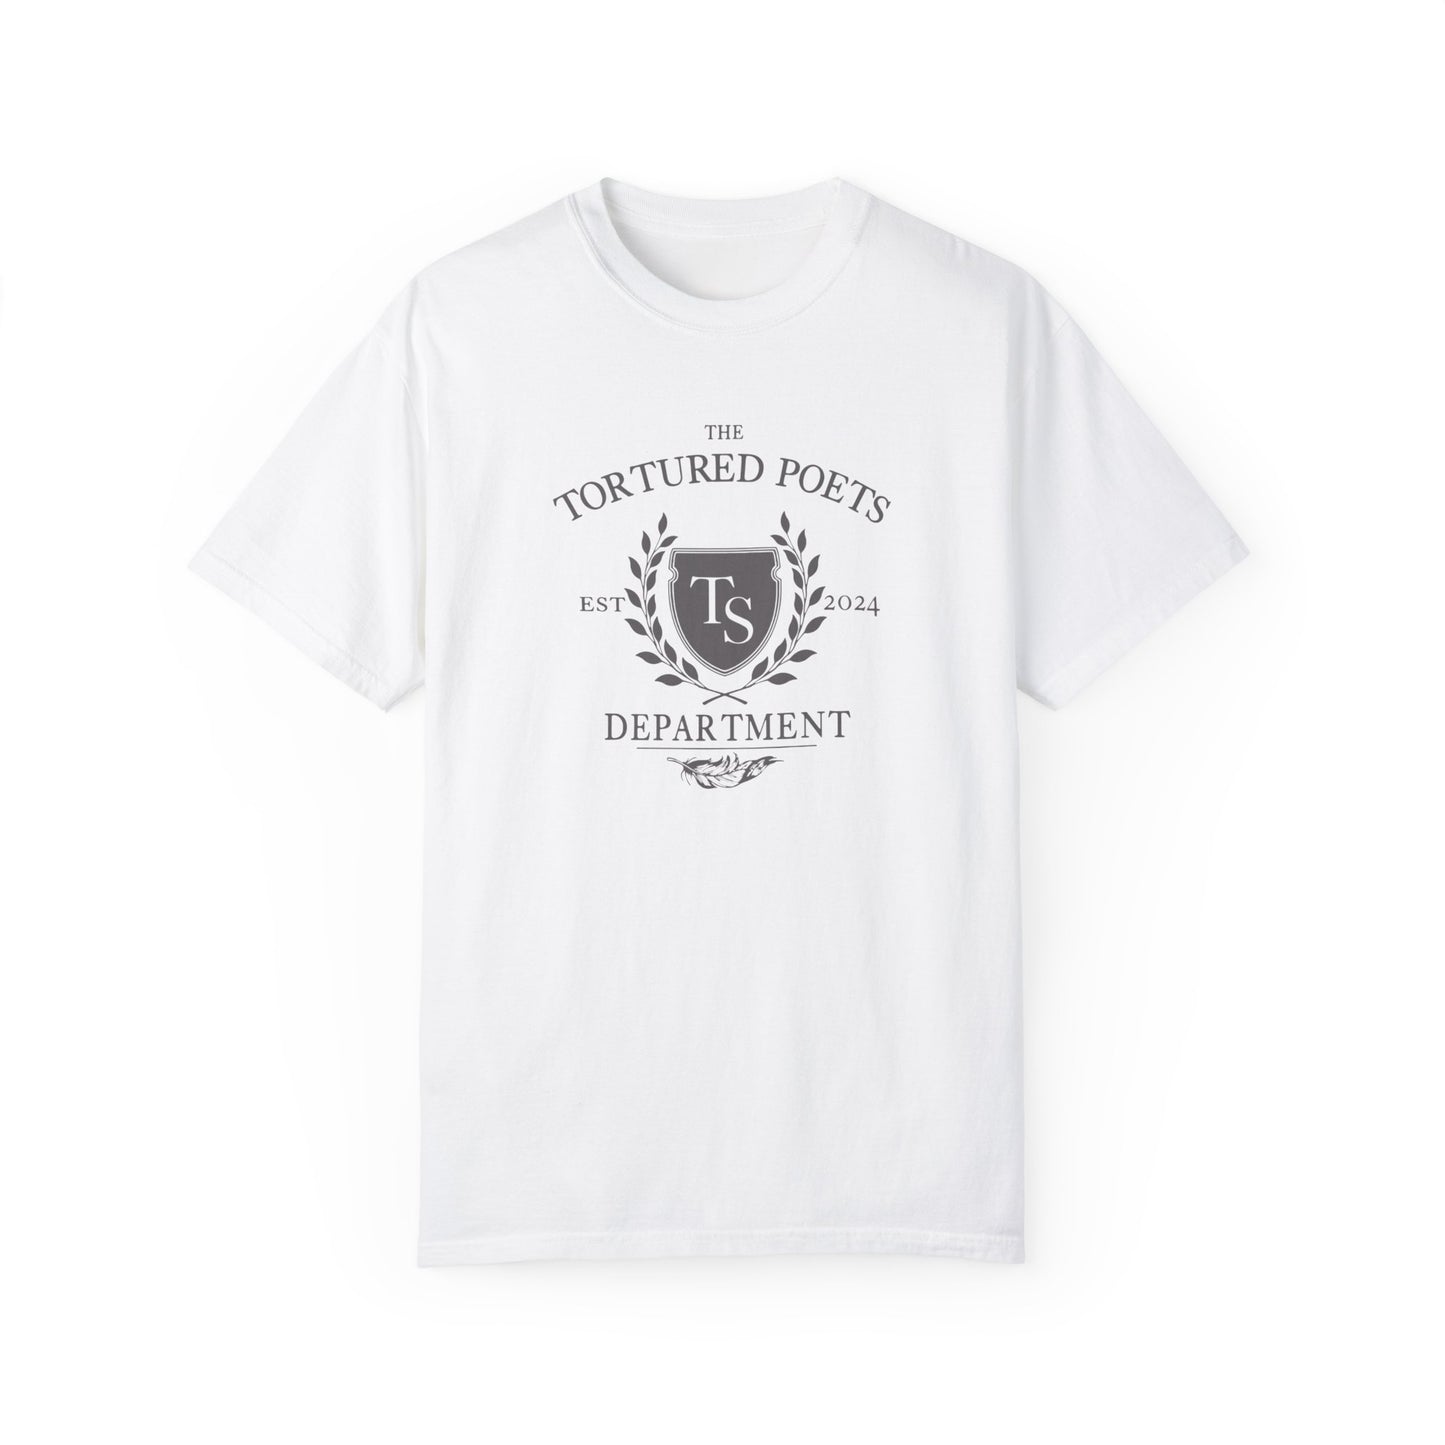 Taylor Swift 'Tortured Poets Department' Inspired T-Shirt